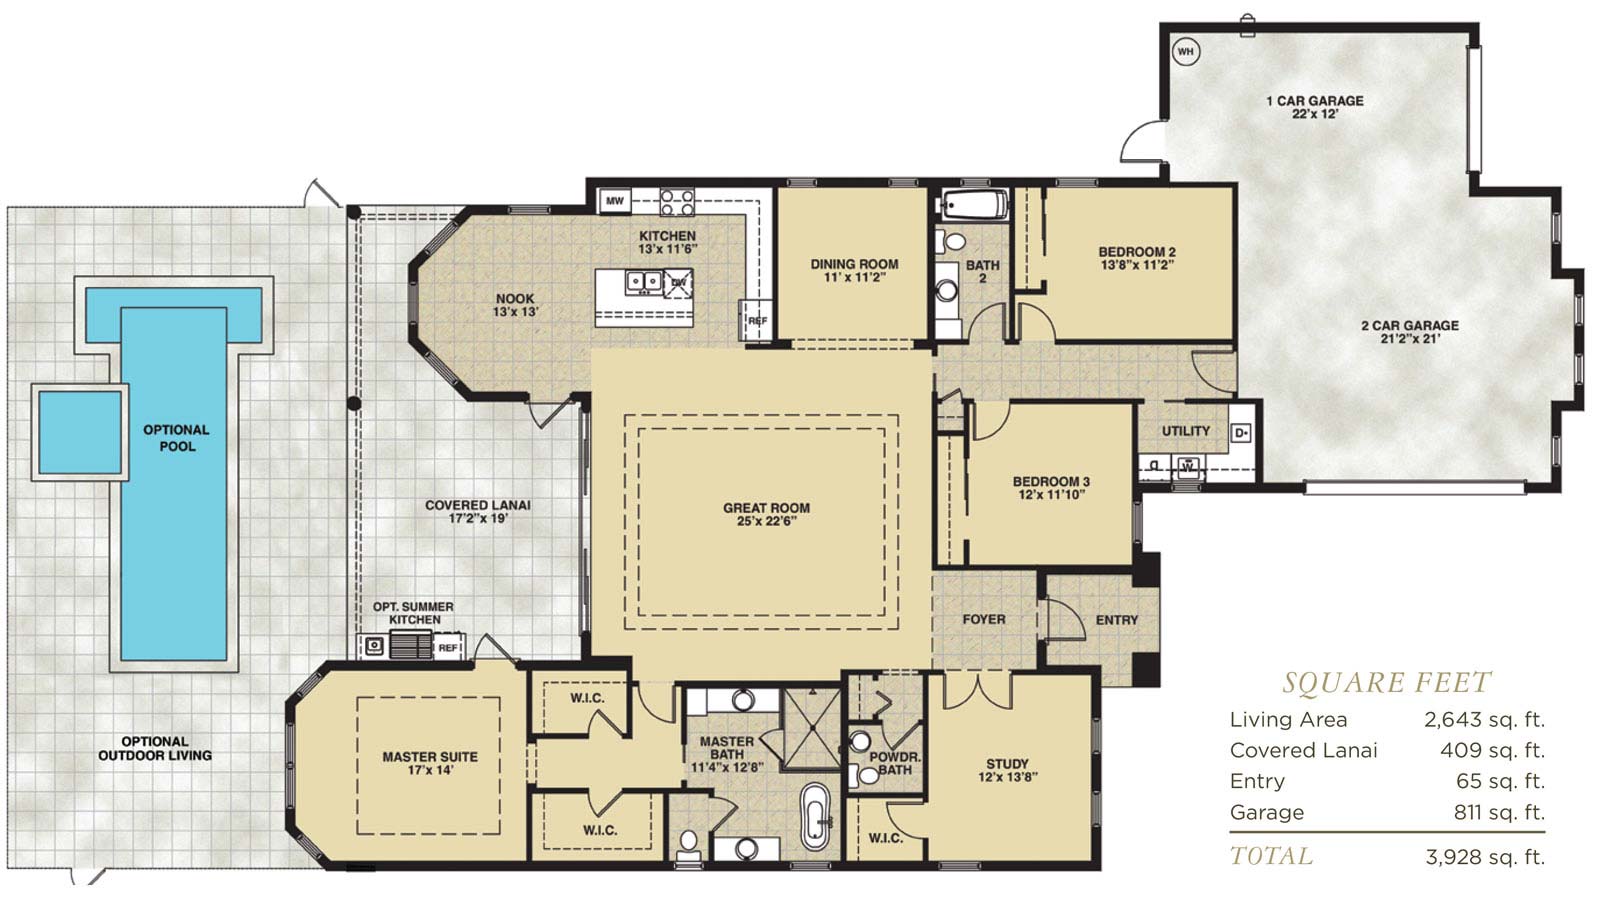 Venice Floor Plan in Hidden Harbor Estates, Fort Myers, Stock Construction, Three Bedroom, Two and One Half Bath, Great Room, Dining Room, Study, Covered Lanai, 2-Car Garage and 1-Car GarageThree Bedroom, Two and One Half Bath, Great Room, Dining Roo